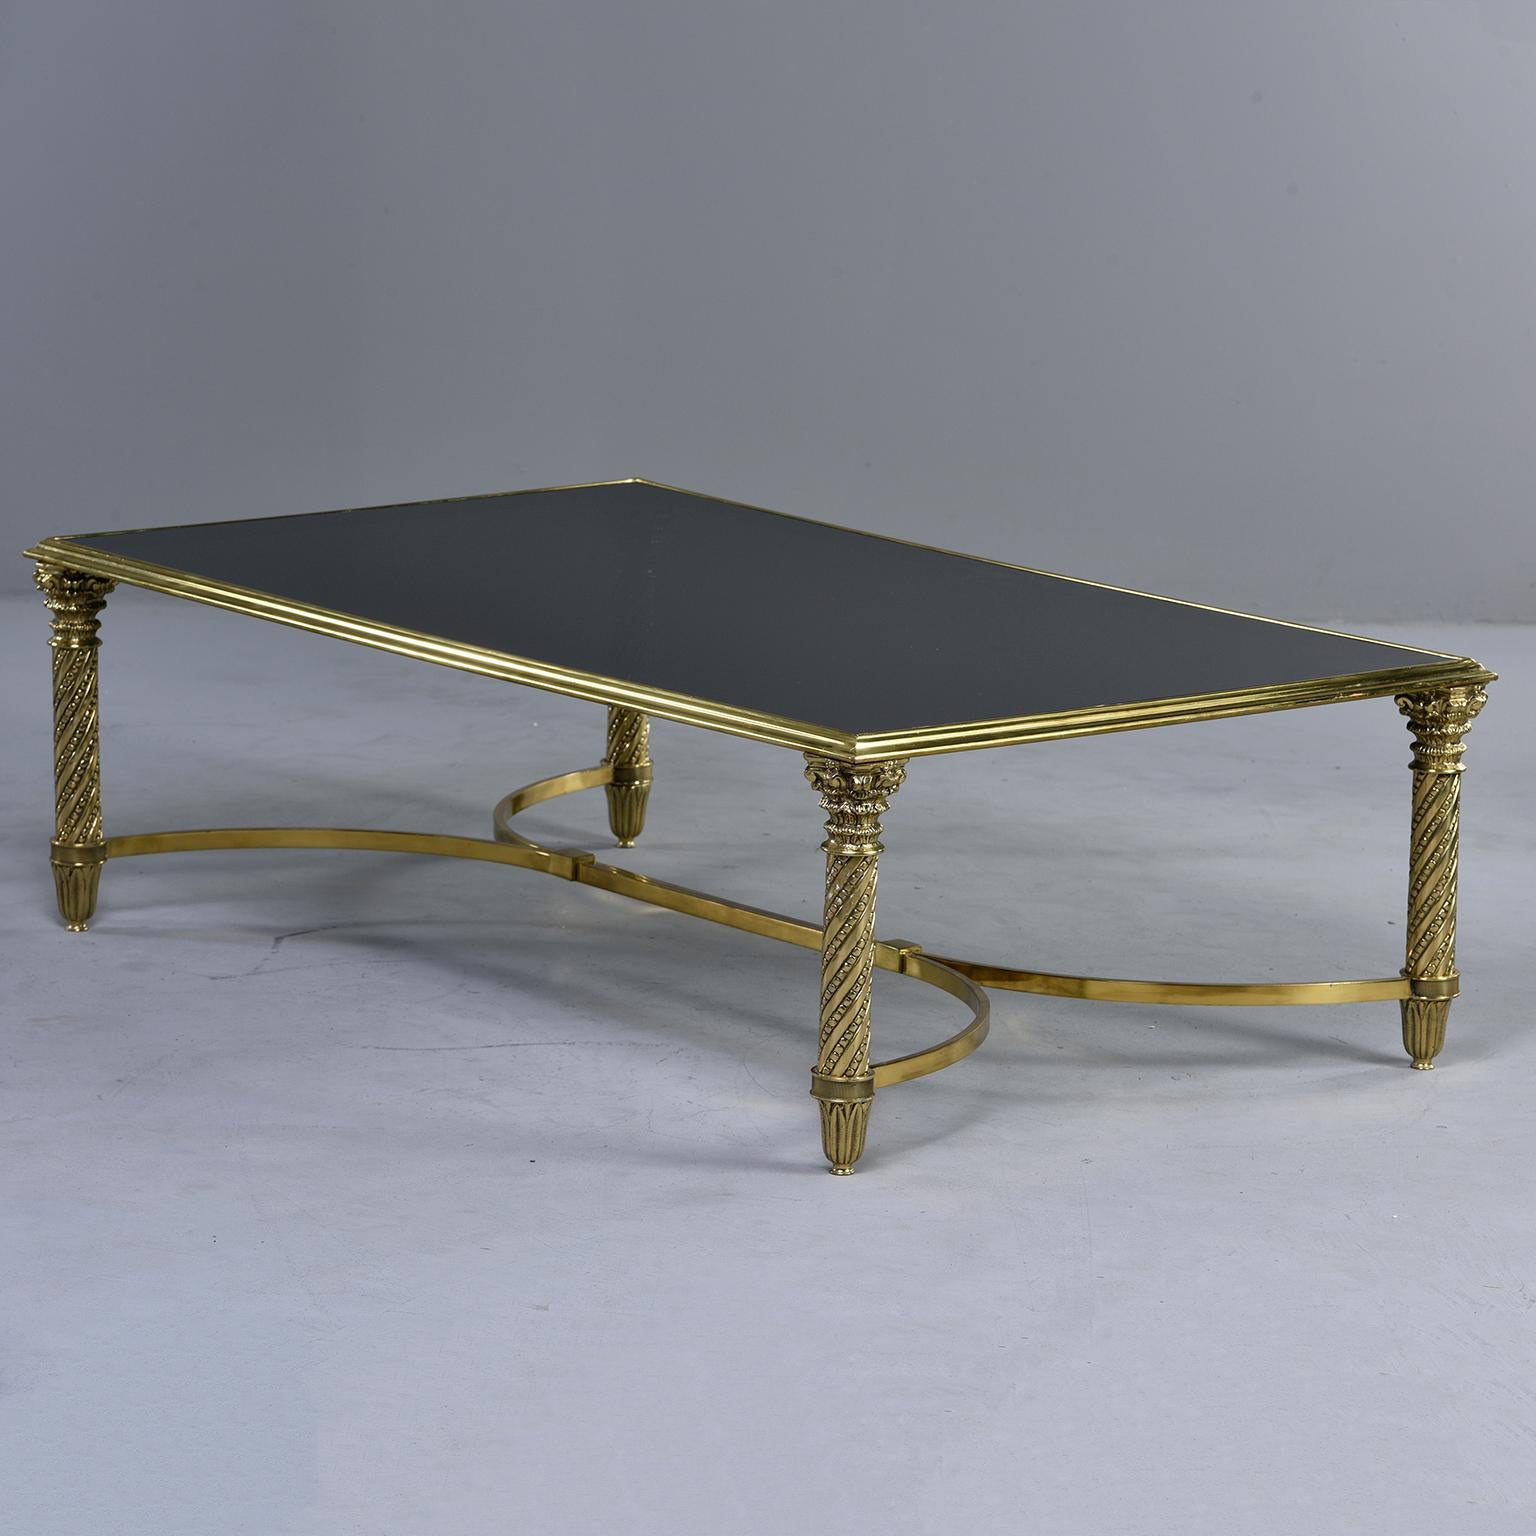 Spanish coffee or cocktail table has a brass base with decorative twisted legs and black glass top, circa 1960s. Unknown maker.